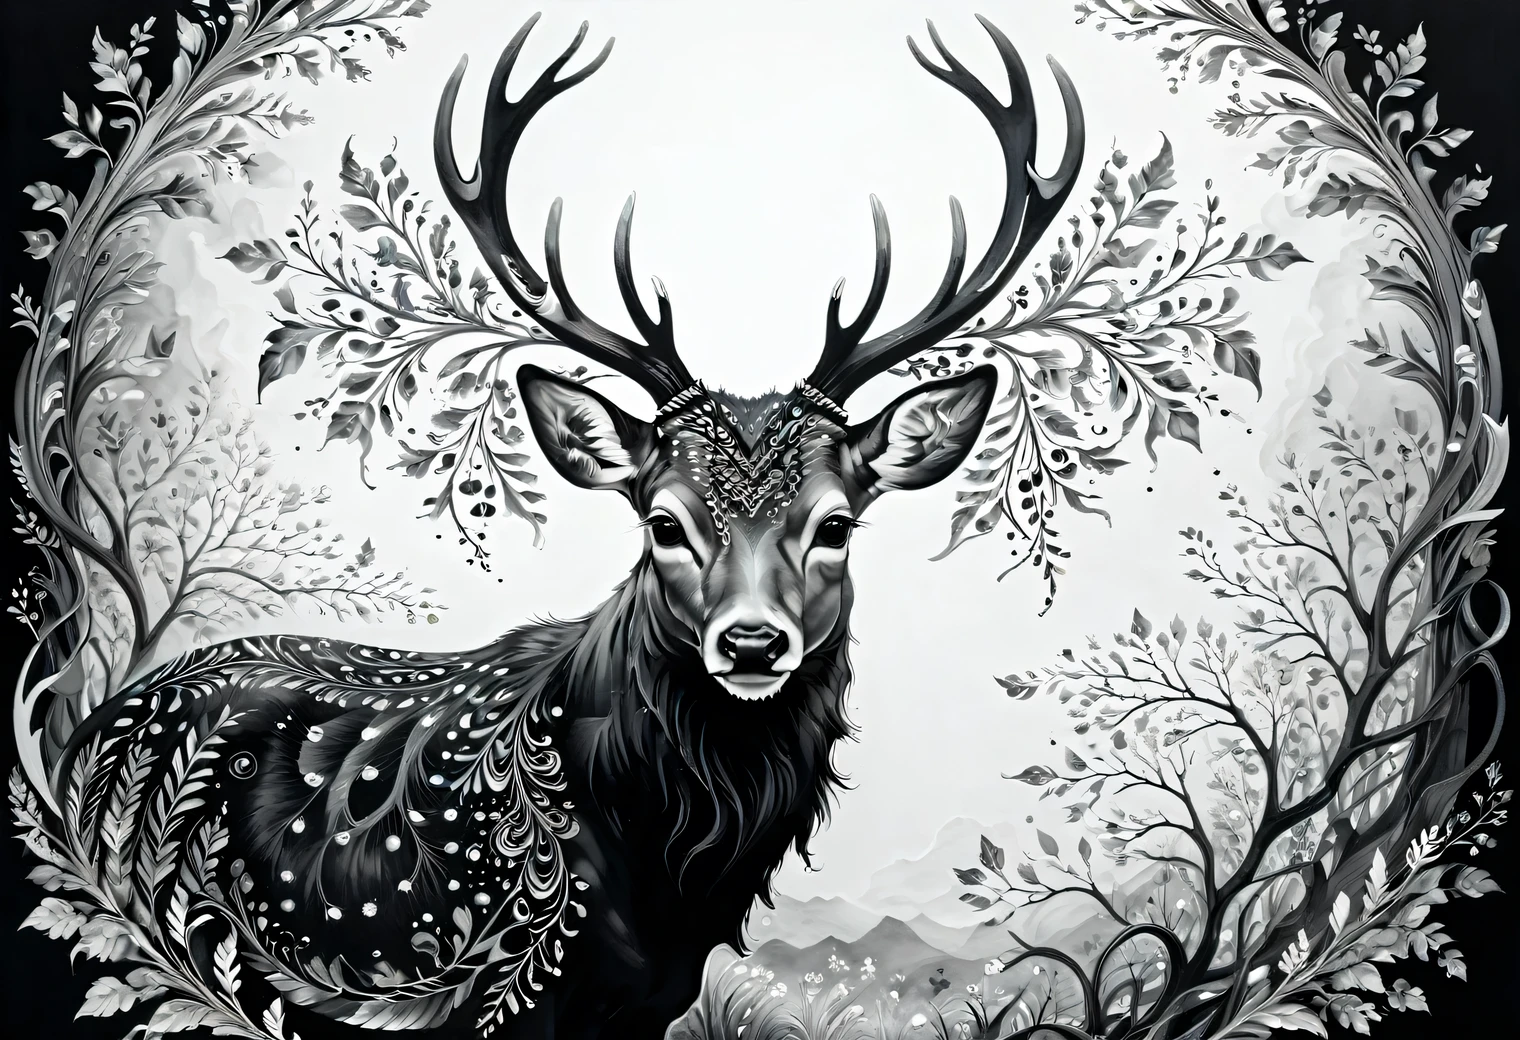 ((Black and white art)), black art, white art, The photo was taken with a Nikon Z 6II camera with a Nikon NIKKOR Z 24-120 mm lens, portrait of a forest deer with spreading unreal horns, deer horns intertwined with branches and stems of surrounding plants of a magical forest, full body, full pose, style, grace, mesmerizing, the work of a master of black and white art, filigree, intricate, depth of volume, illusion in the image, (black and white image):1.6045. 35 mm, f/3, 1/25 sec., ISO 120.